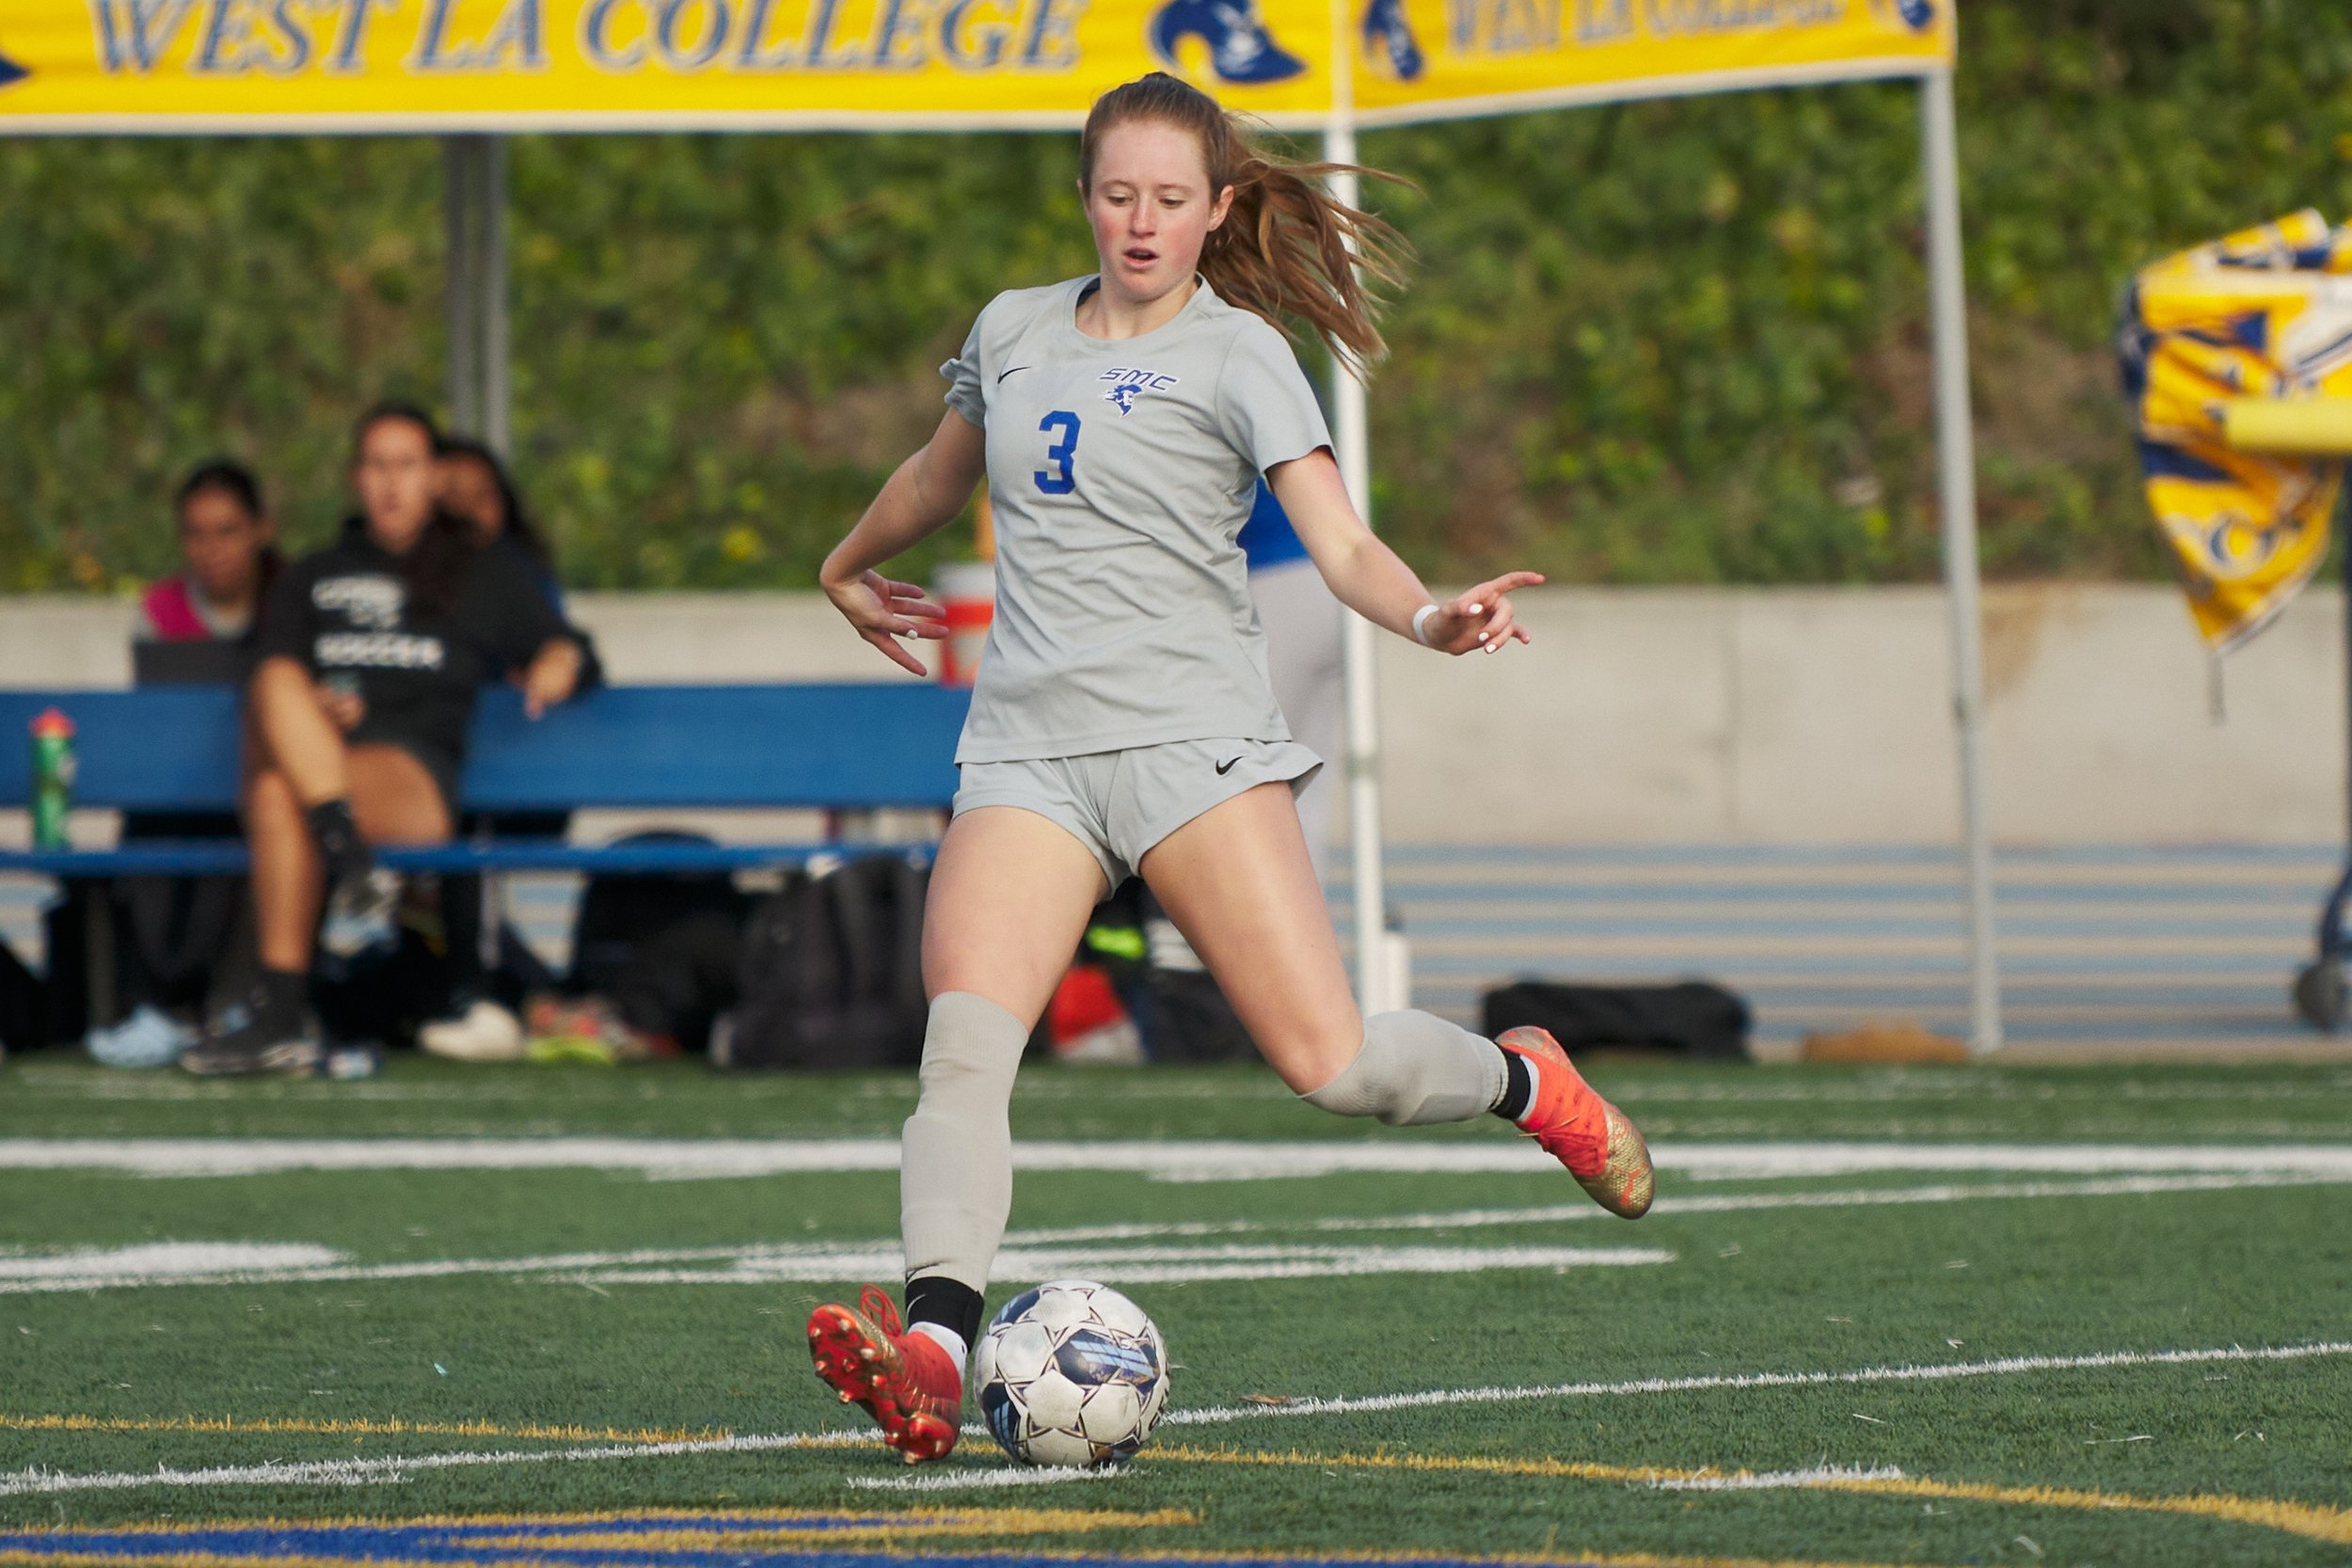  Santa Monica College Corsairs' defender Izzy Turner during the women's soccer match against the West Los Angeles College Wildcats on Friday, Sept. 29, 2023, at Wildcat Stadium in Los Angeles, Calif. The Corsairs won 5-0. (Nicholas McCall | The Corsa